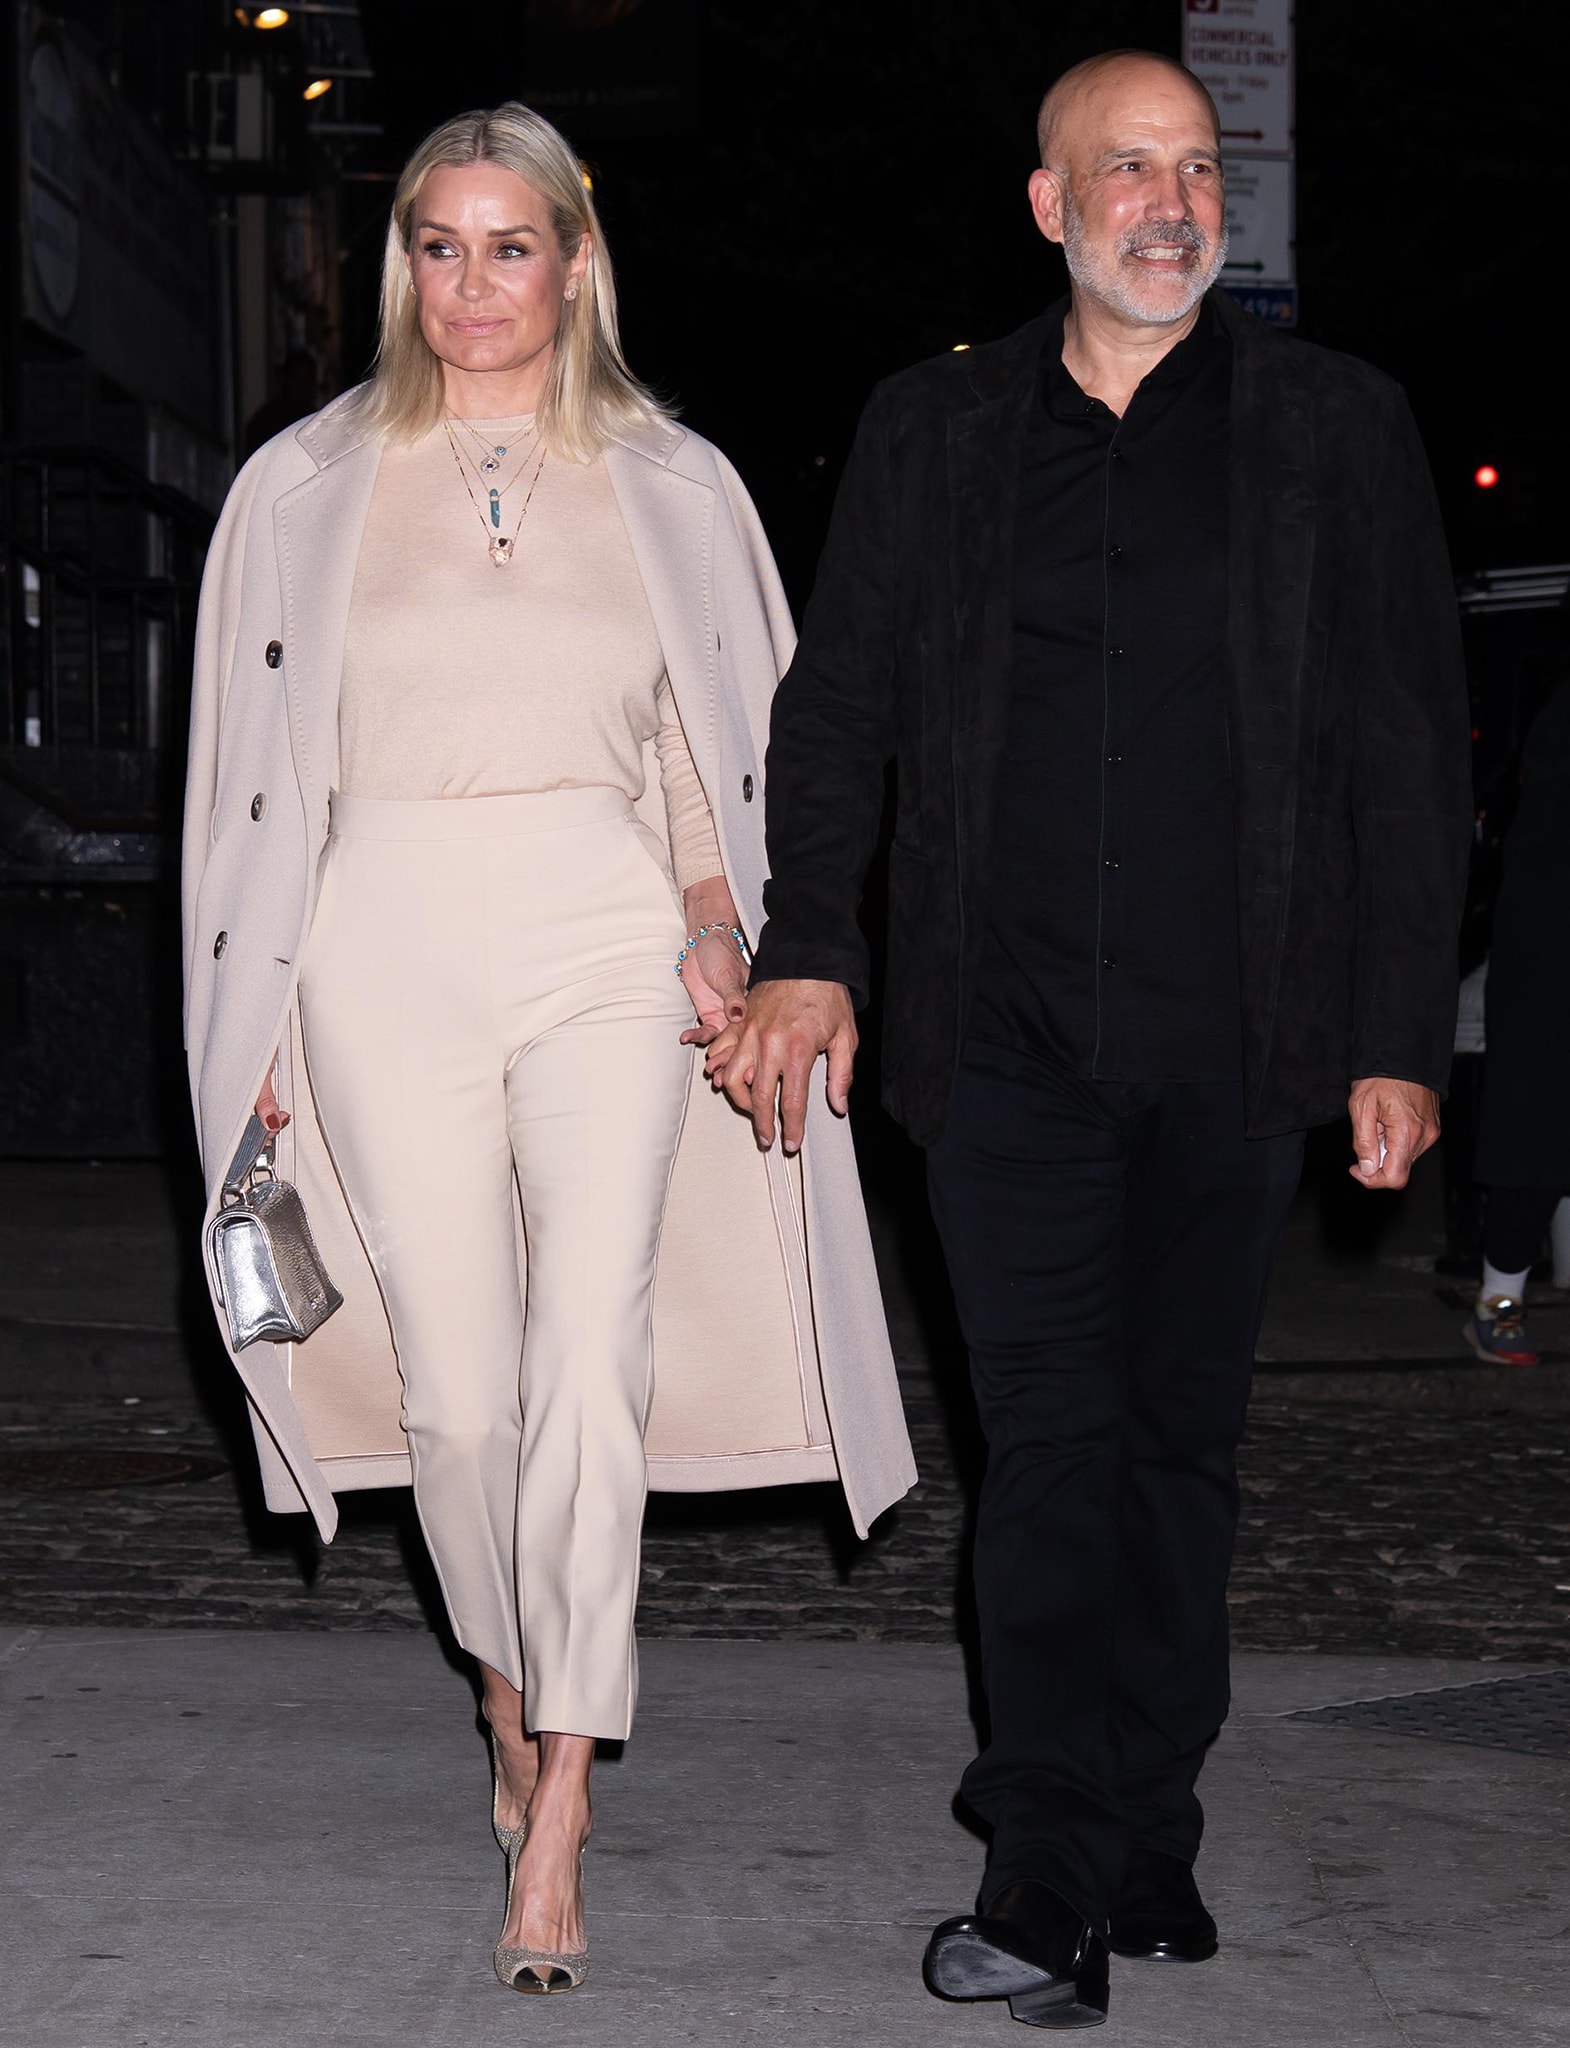 Yolanda Hadid glams up in monochromatic nude outfit as she holds hands with boyfriend Joseph Jingoli on her way to the venue